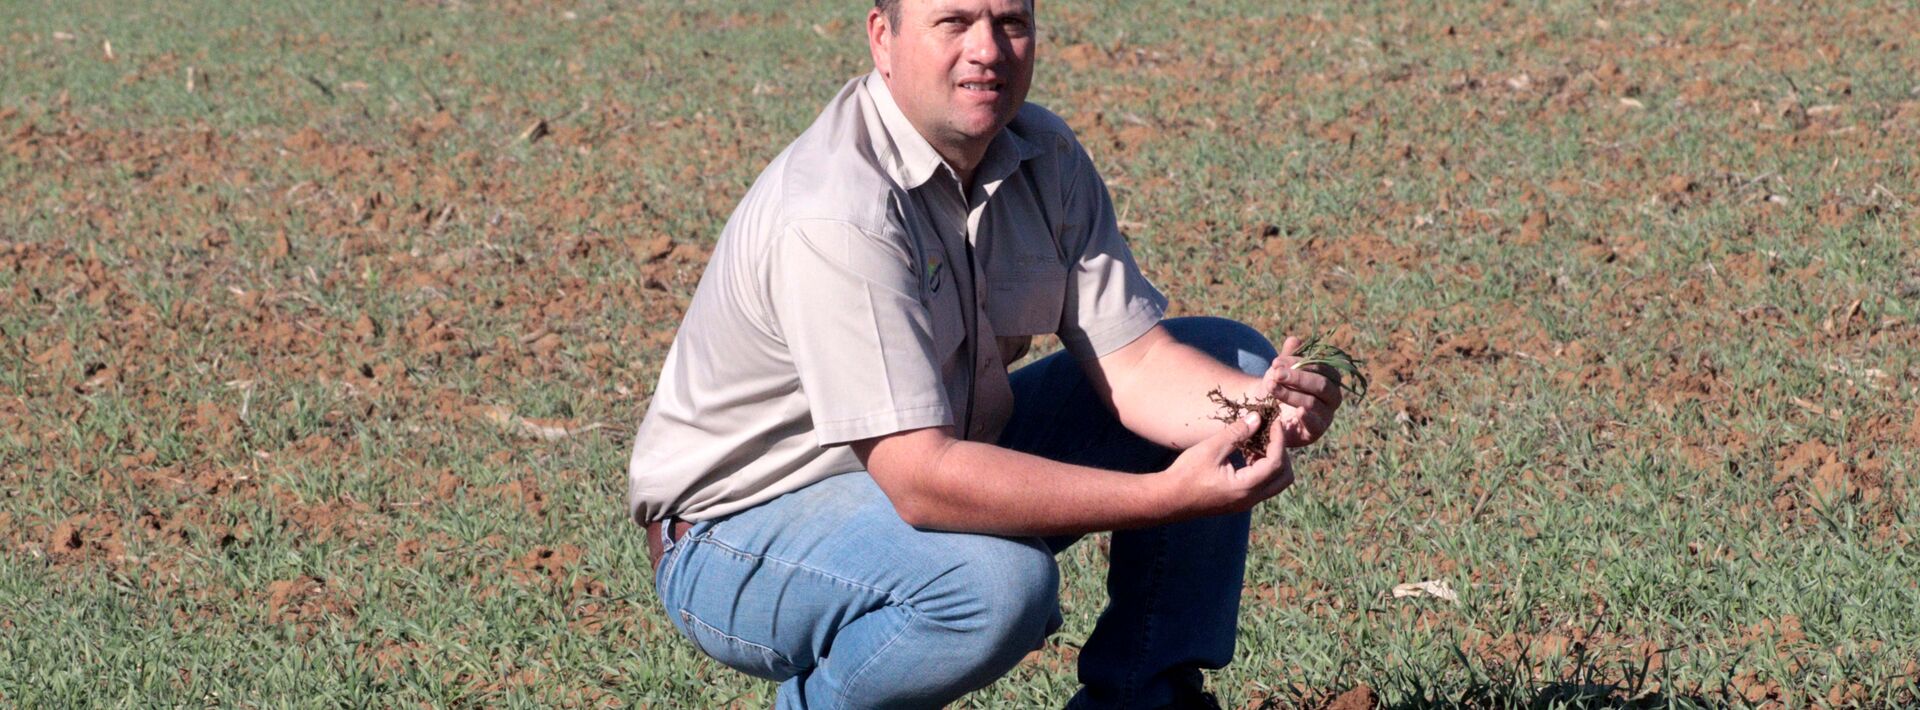 A farmer inspects the quality of his soil 